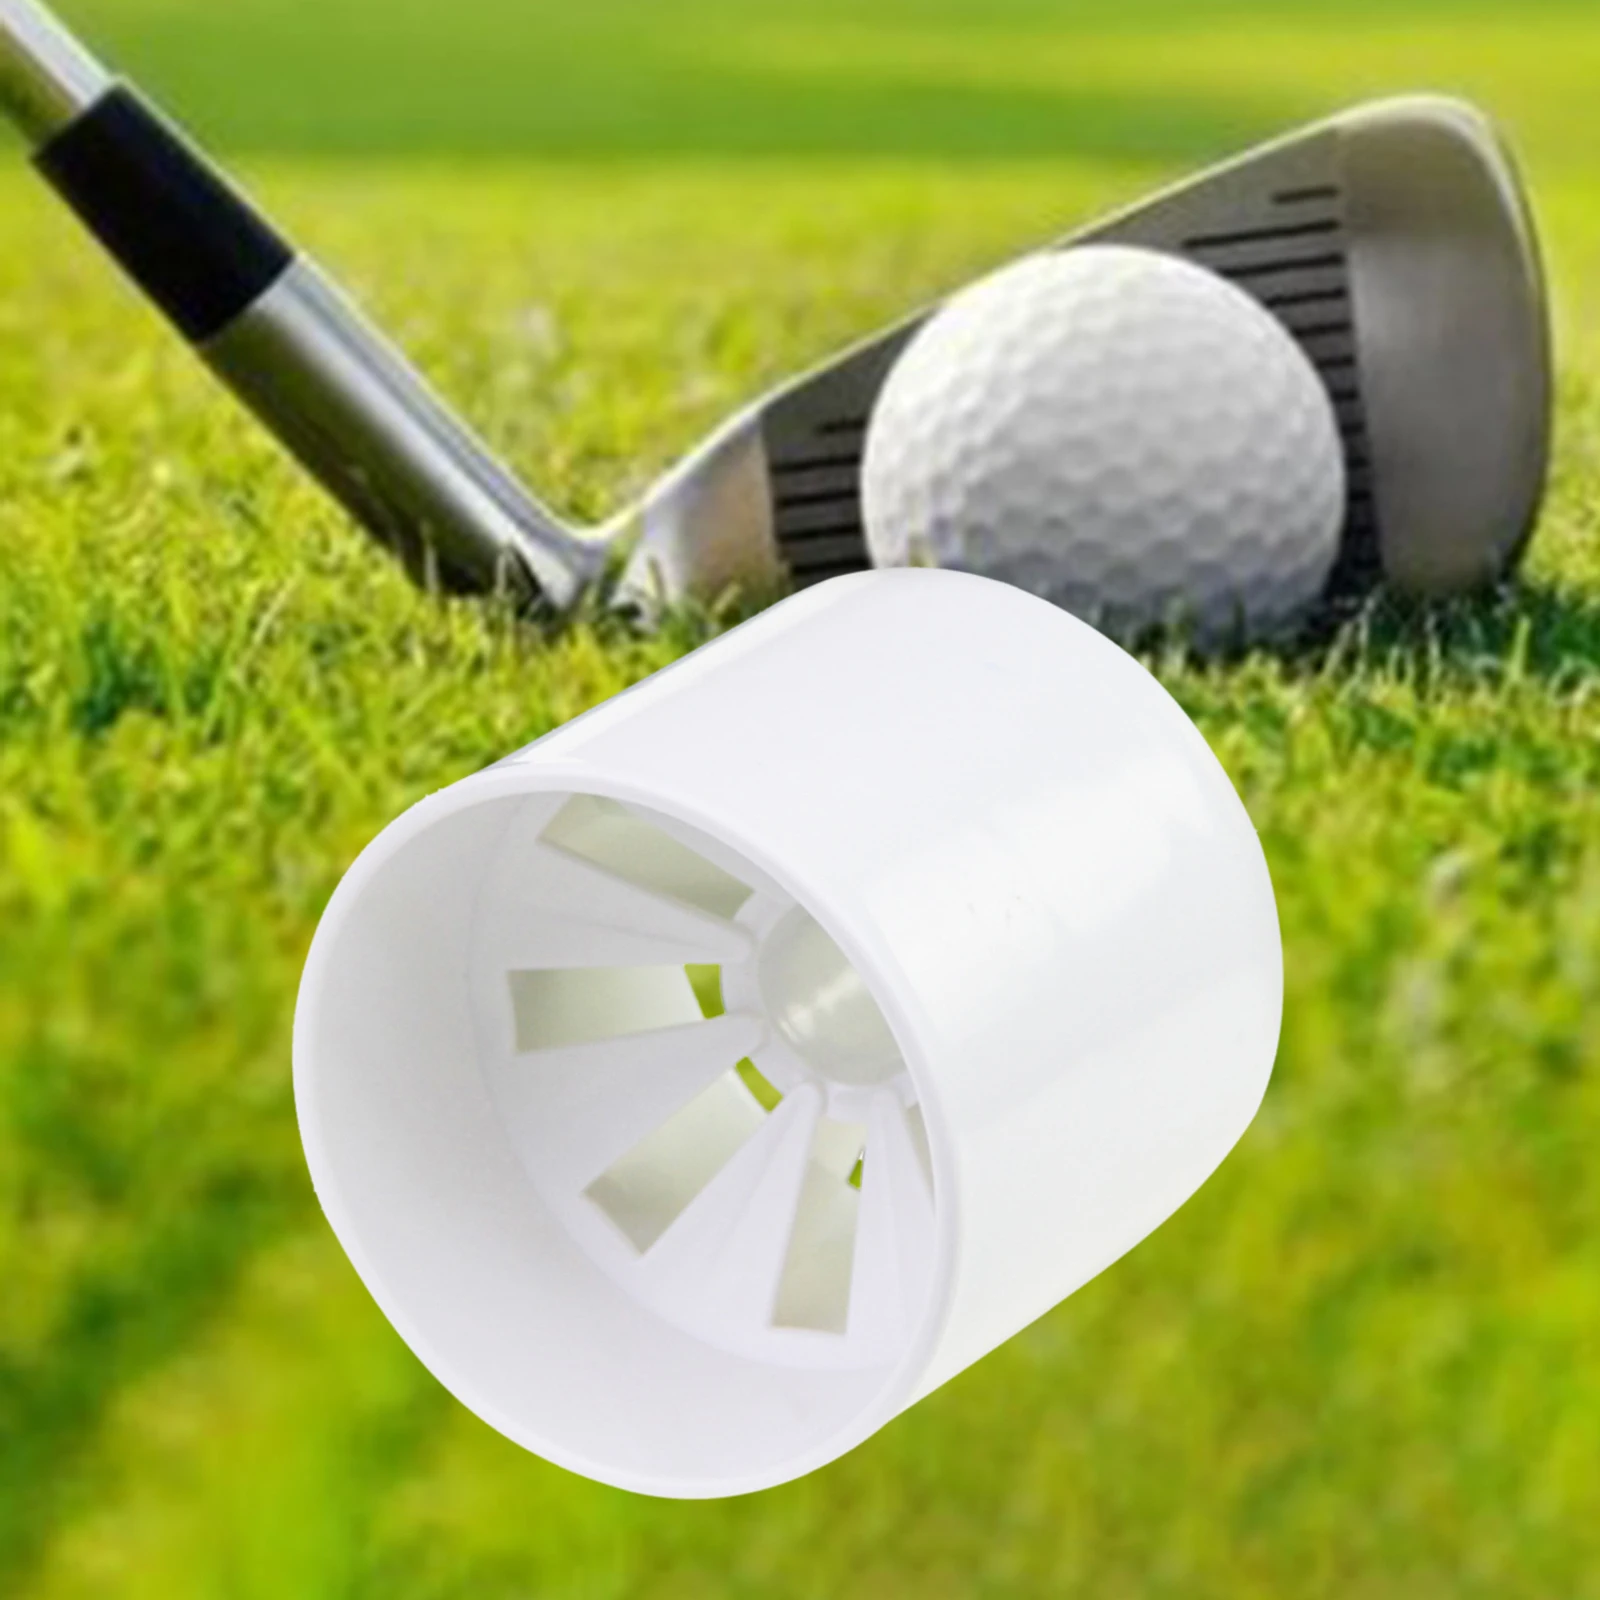 Golf Cup Hole Cups for Putting Green Backyard Training, White Plastic Training Ball Socket